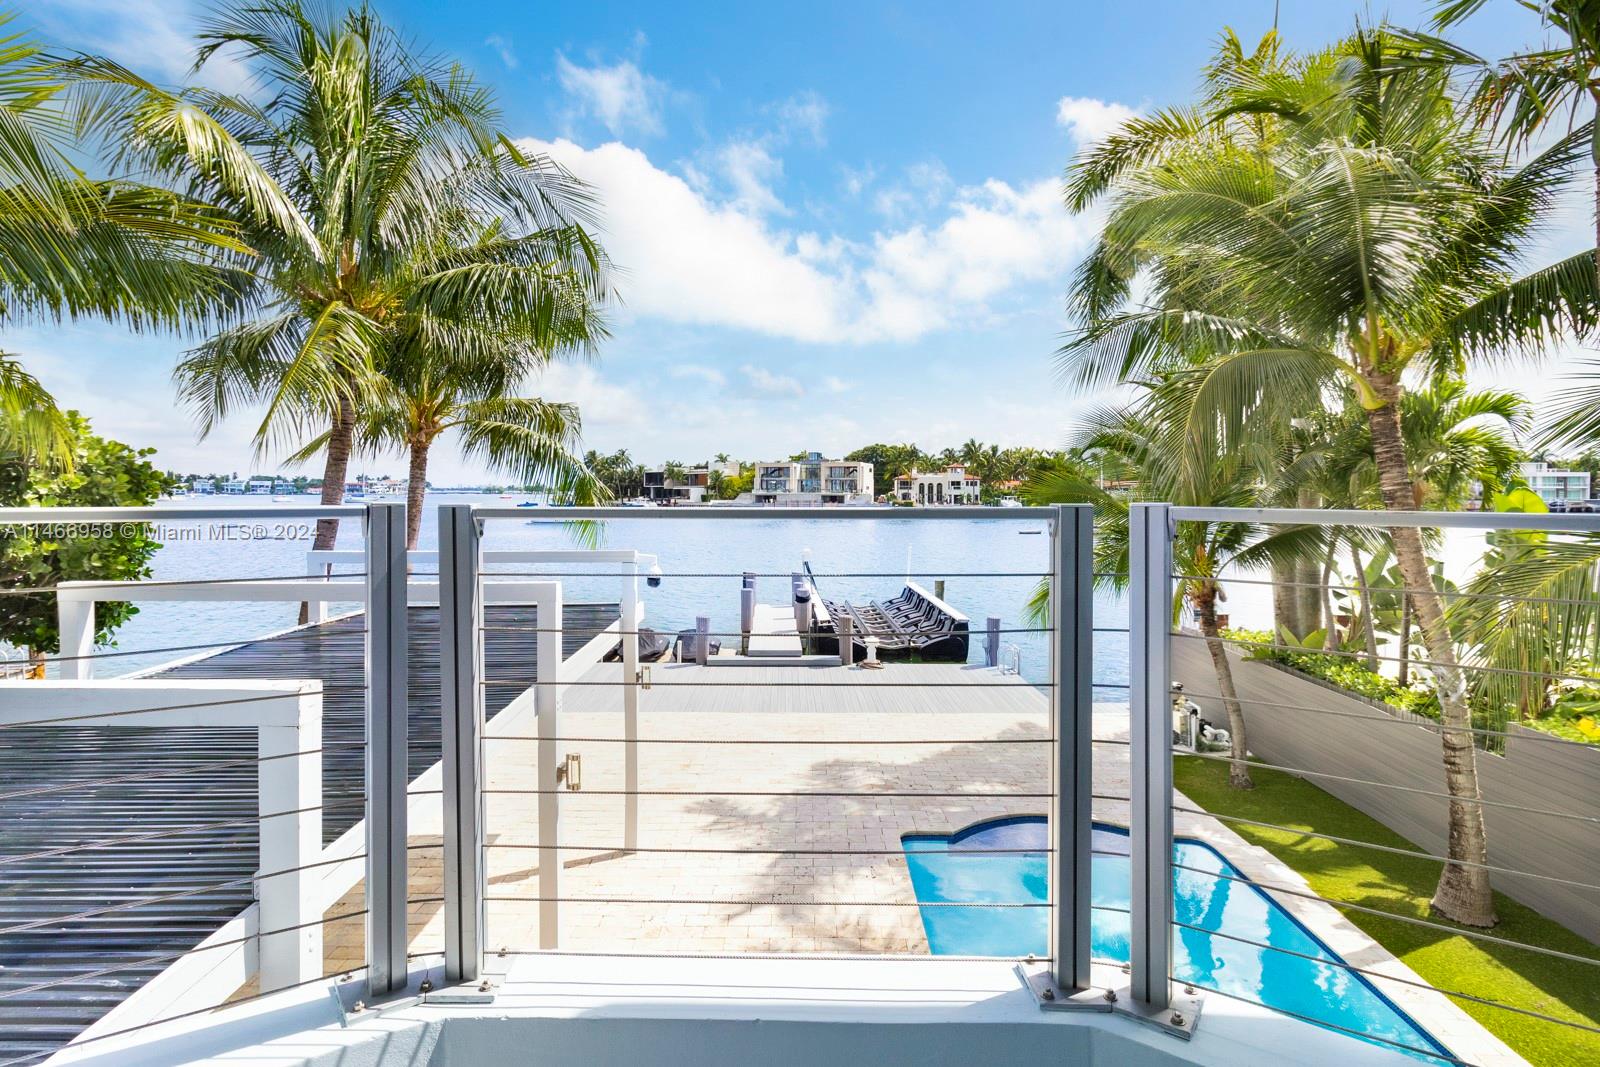 This spectacular waterfront home has been totally renovated with a construction upgrade of a new entrance and third floor railings in 2019. All the bedrooms are in suites and facing the open bay. 5 bed 5 1/2 bath with rooftop terraces. 36 x 24 CARIBBEAN BLUE marble & wood floors throughout. Beautiful kitchen with top of the line appliances, granite counter tops, impact windows, storage room, sound system, brand new back-up generator installed in 2023, solar heated pool, new dock and new 50 linear foot seawall. New floating lift that holds up to 25, 000 lbs, and a floating dock for 2 jet ski. The Second and third floor of the house were built in 1989. With breathtaking views this beautiful property is ready for a new owner. Come enjoy the gorgeous view of the bay, and Miami.